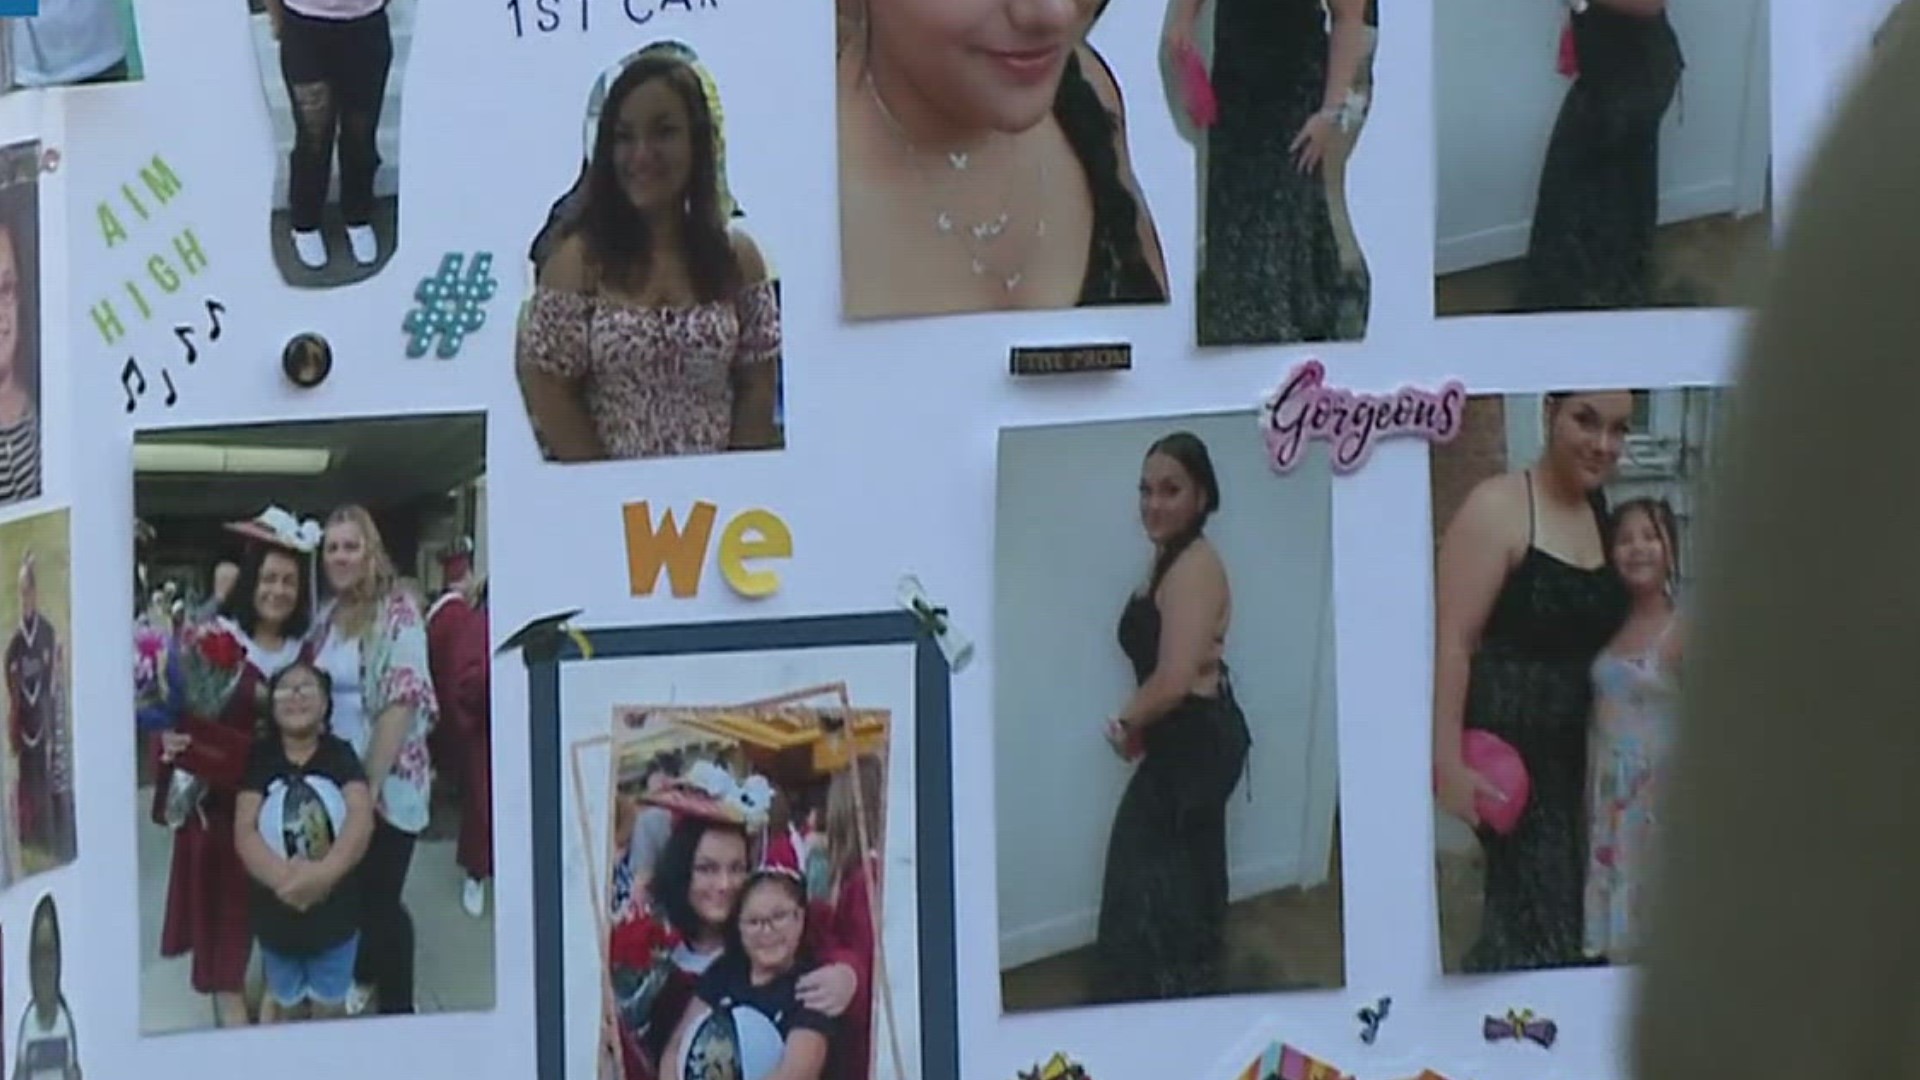 Friends and family gather in prayer and support of Destiny Cohen (17 y/o), teen who was badly injured in a car crash